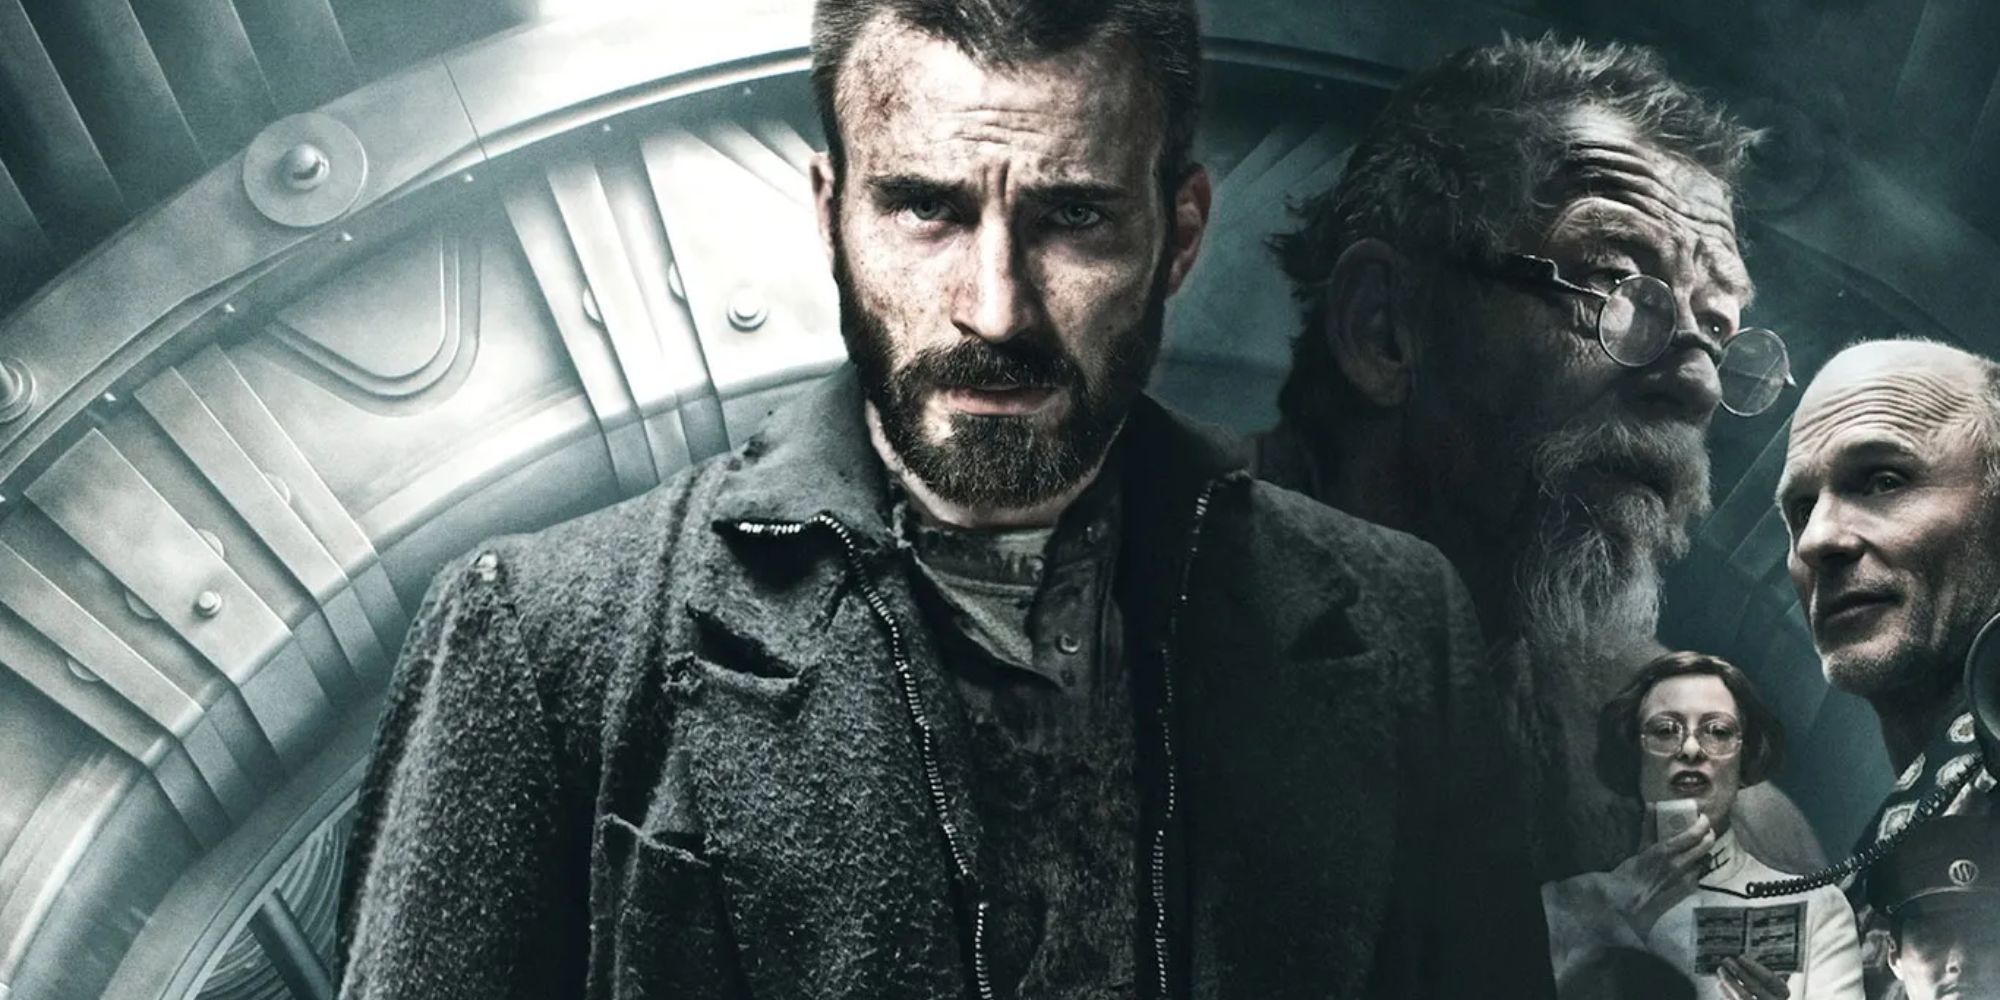 Promotional image featuring characters from the film Snowpiercer (2013)